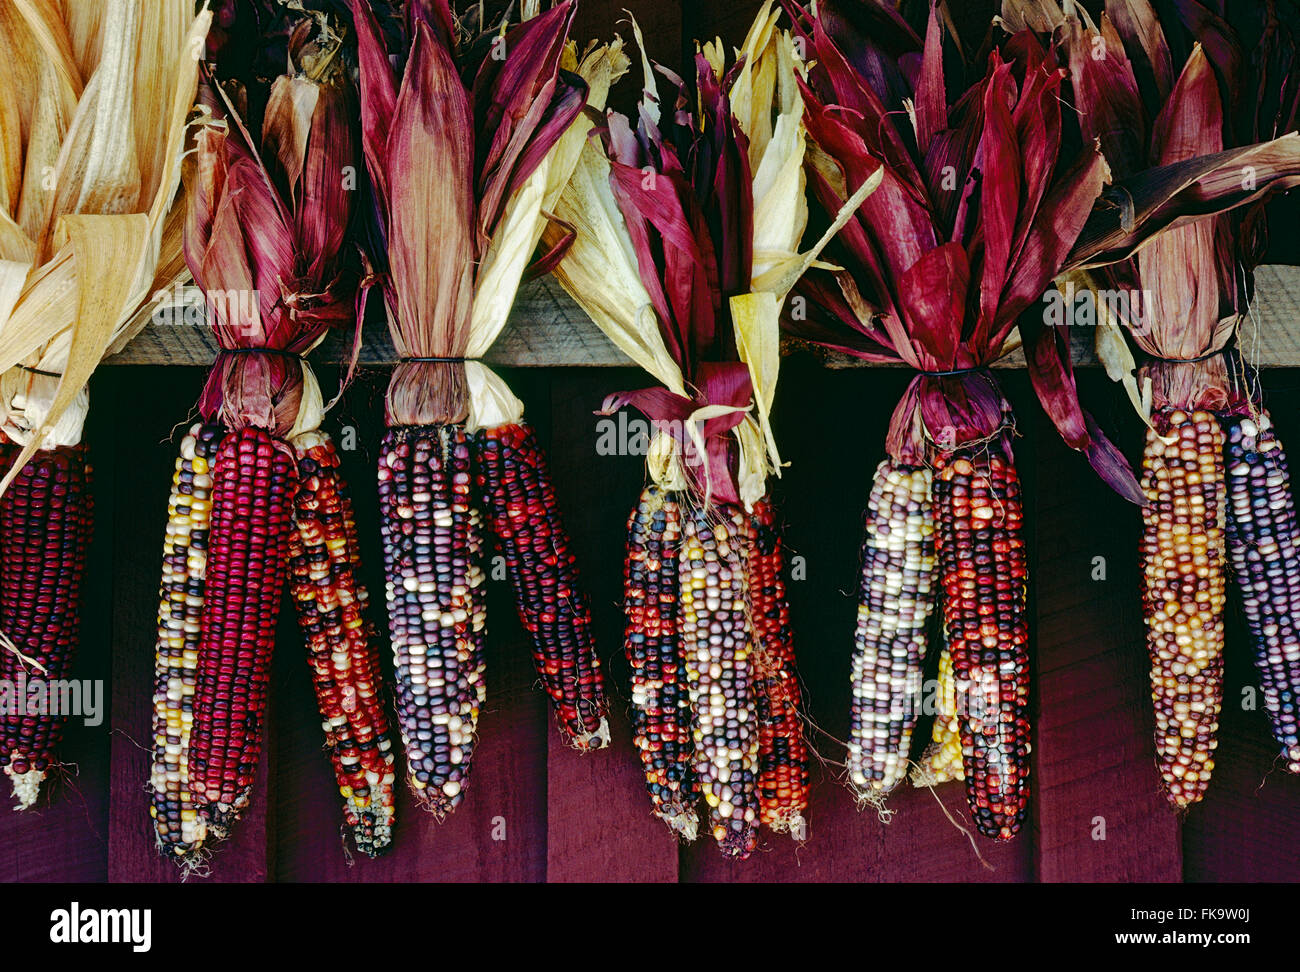 Colorful Indian Corn cobs hanging on display at Pennsylvania farmstand Stock Photo